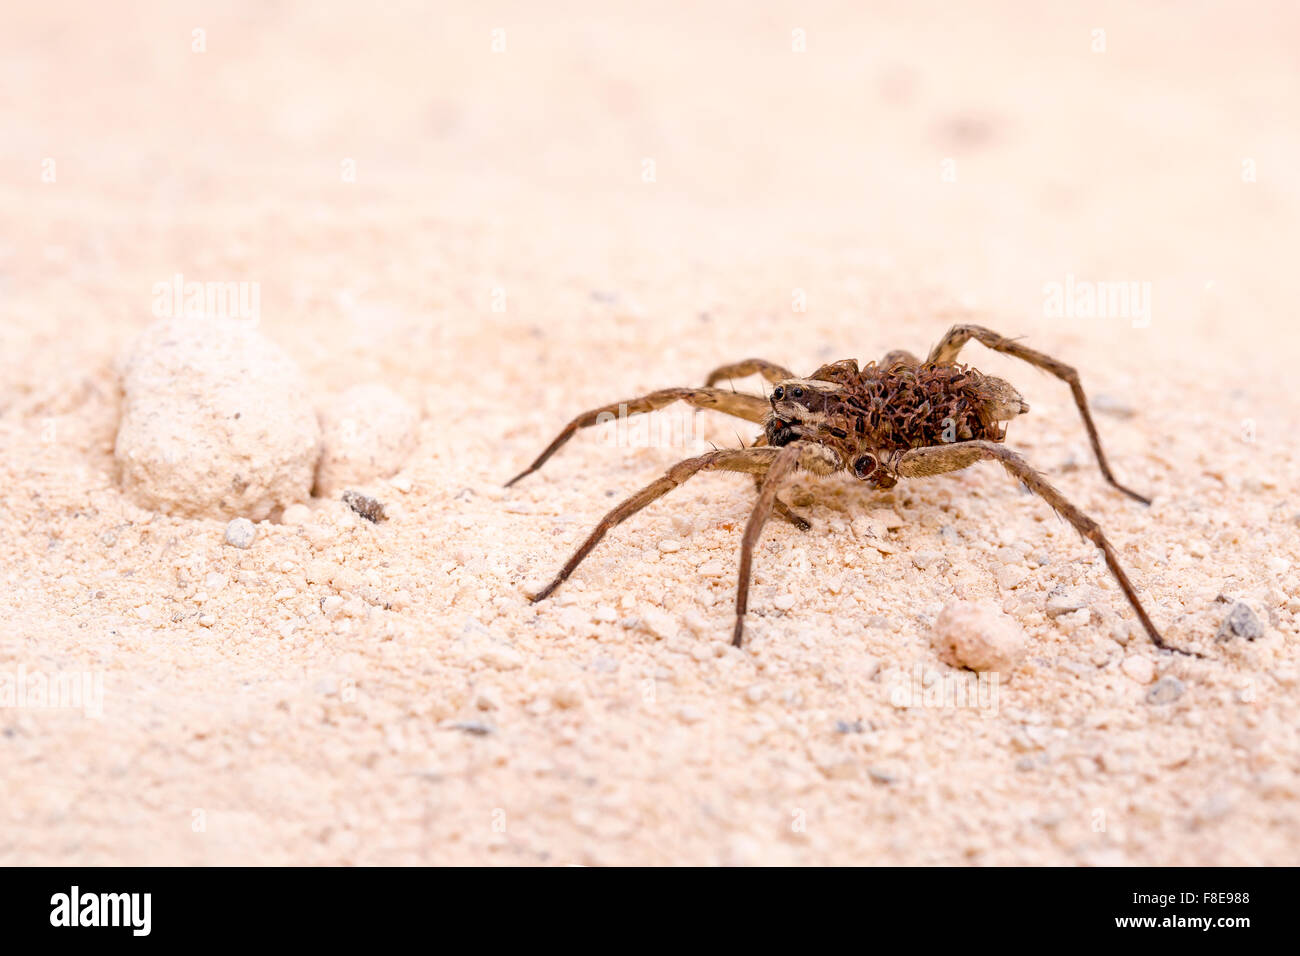 Wolf spider (Family Lycosidae) on sand. Photographed in Israel in October Stock Photo